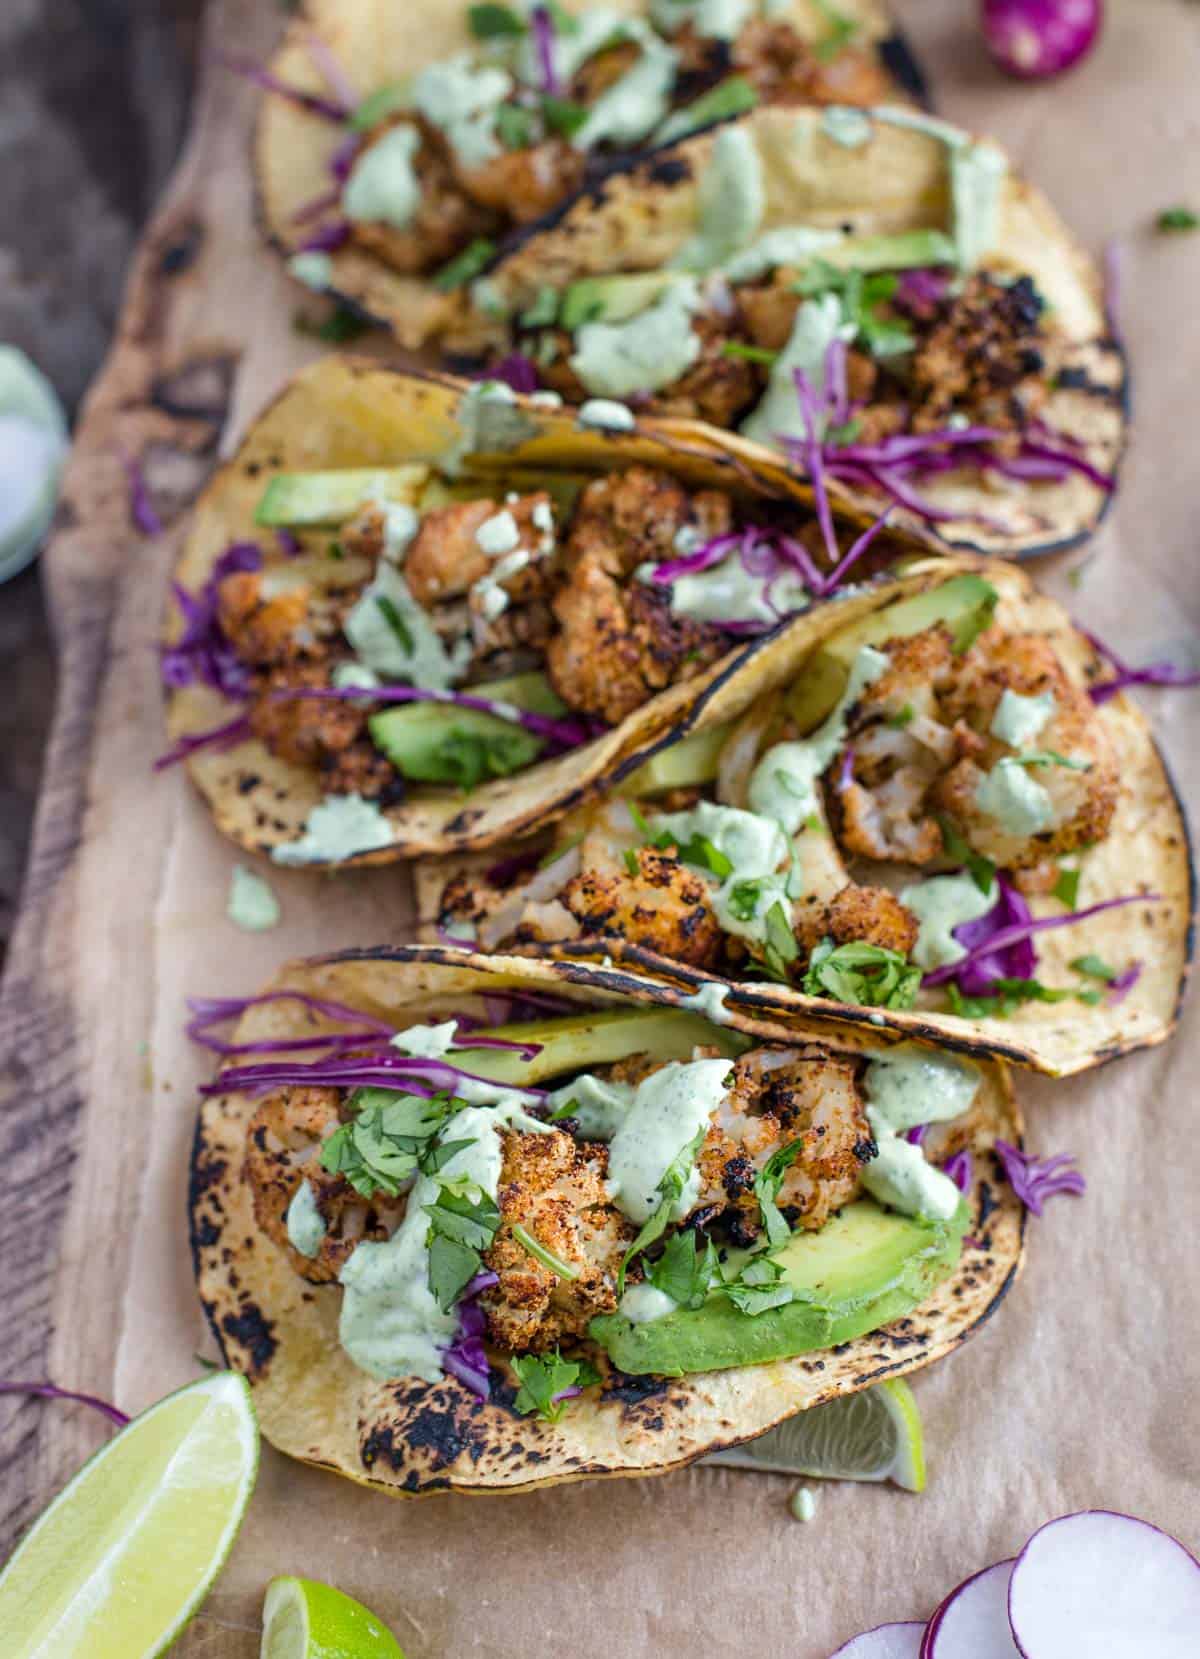 Grilled Cauliflower Tacos topped with an avocado cream